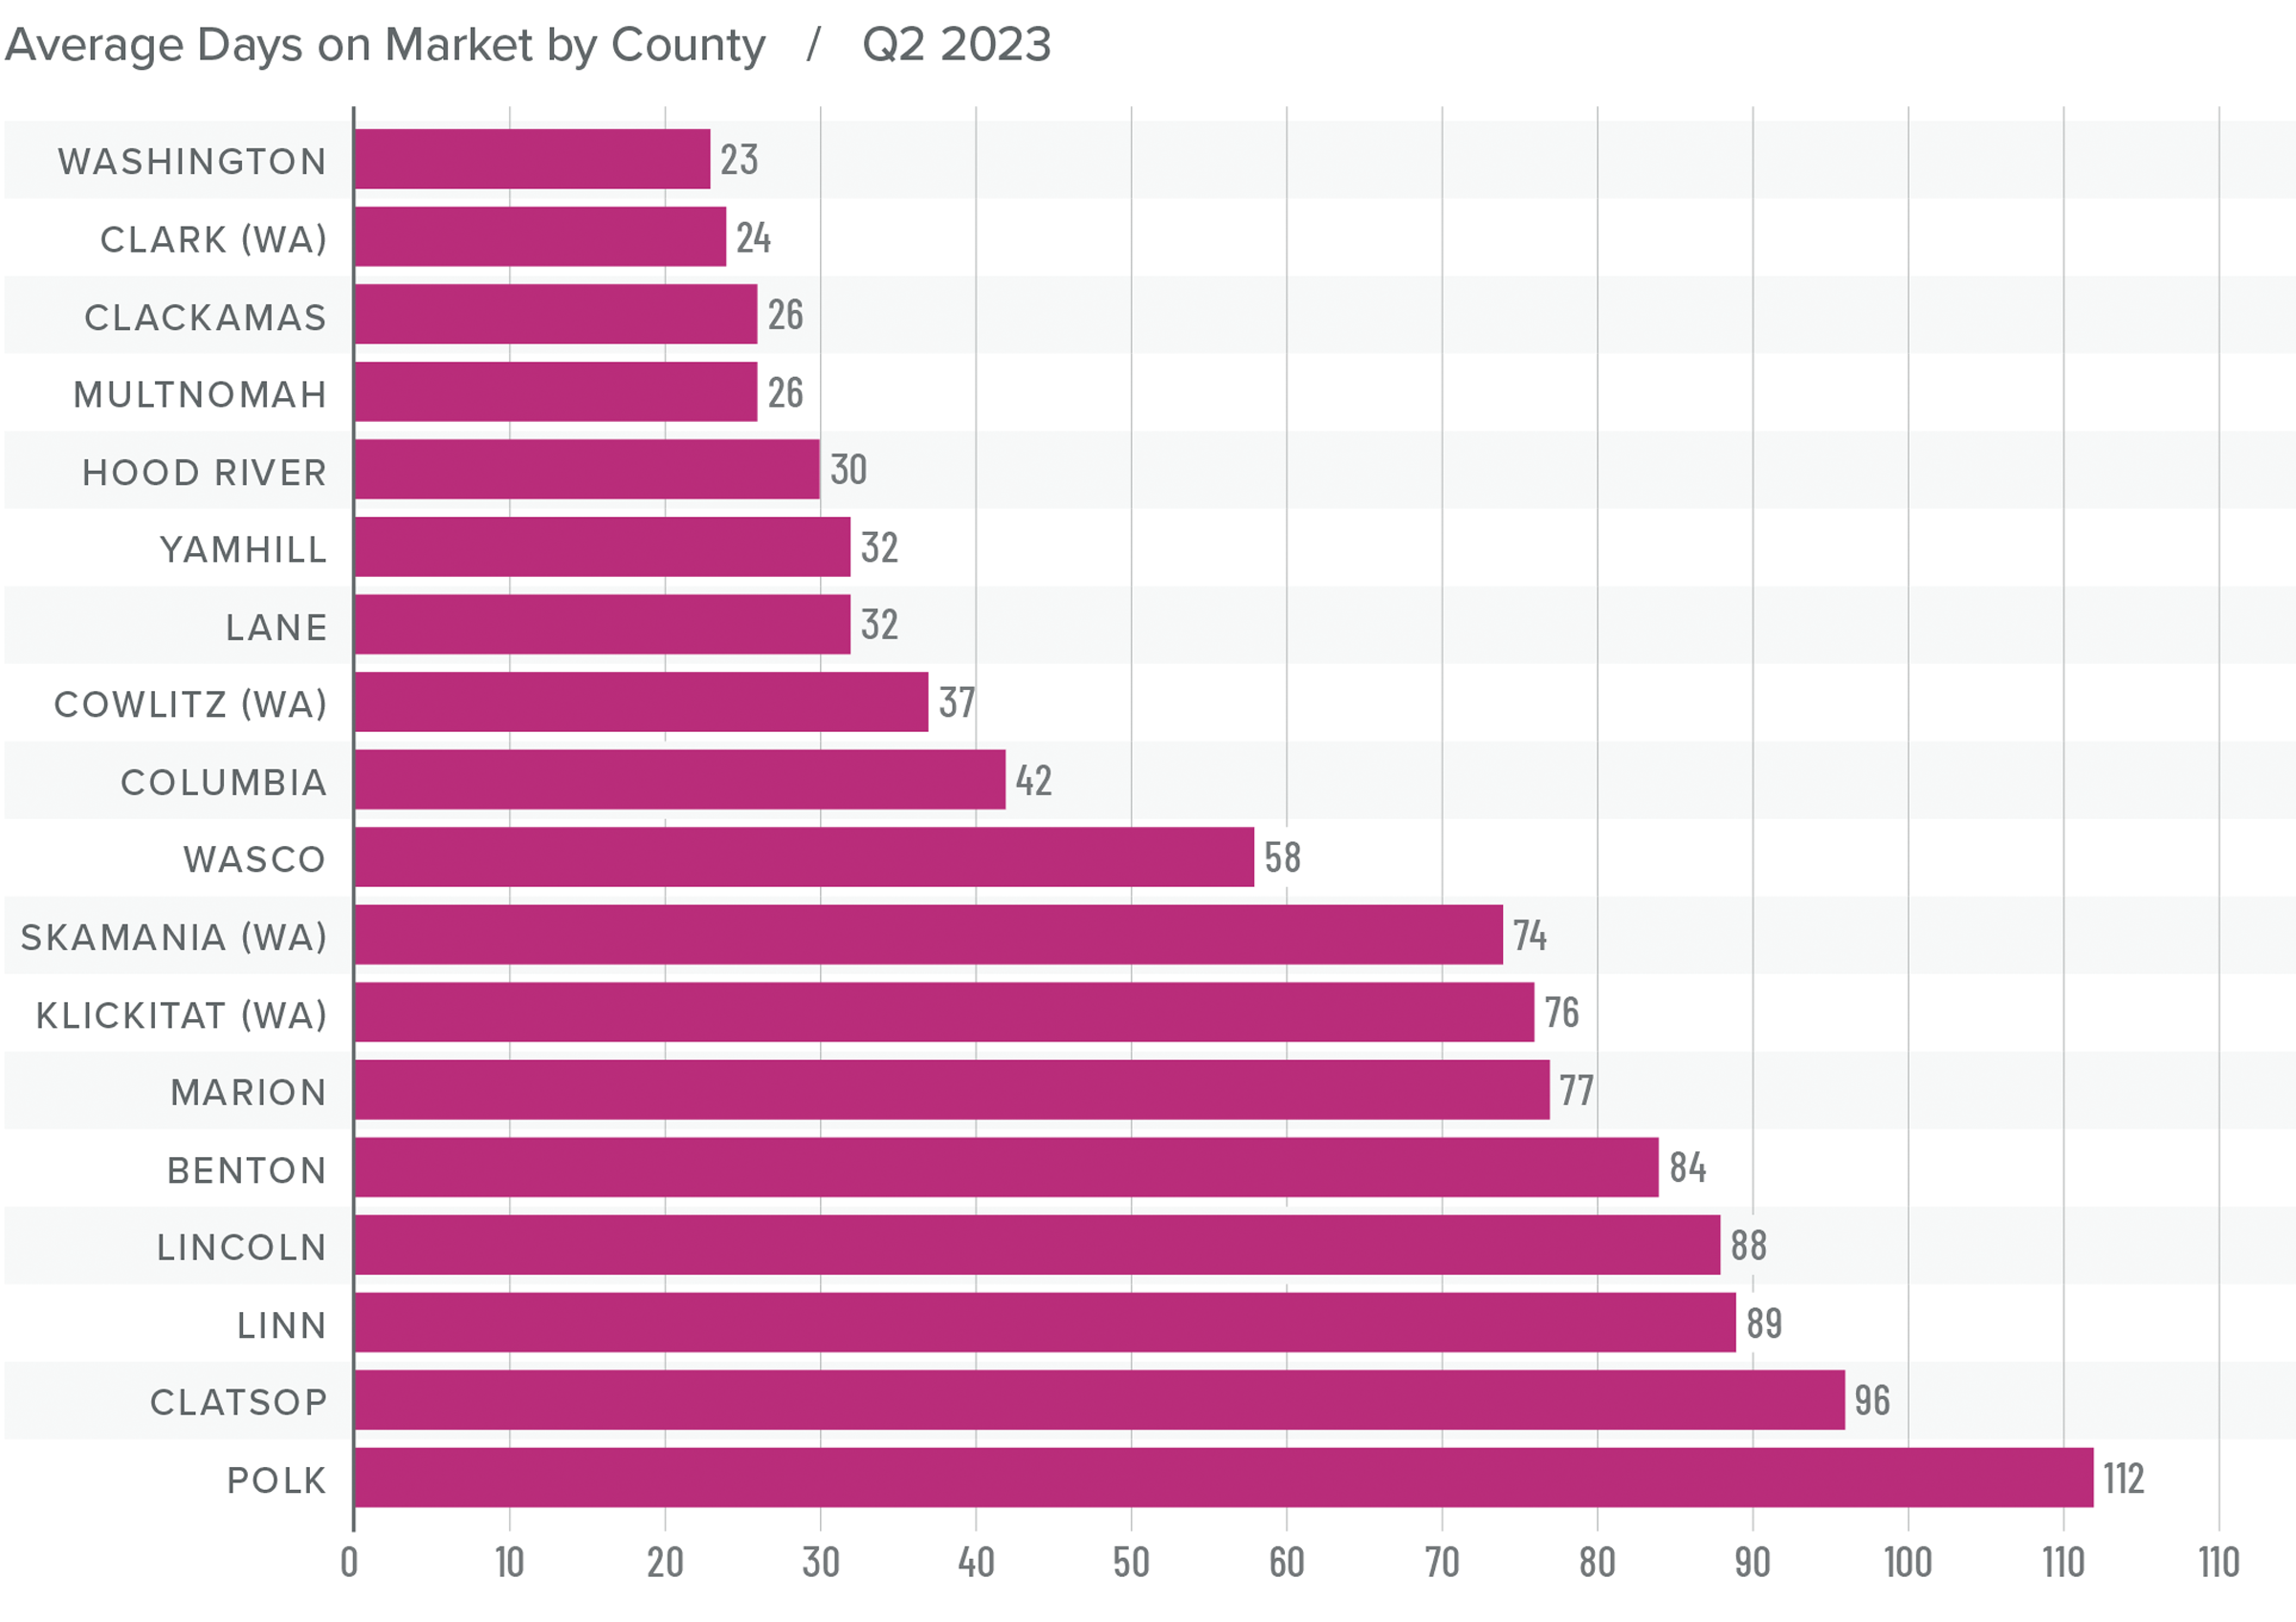 A bar graph showing the days on market by county for homes in Northwest Oregon and Southwest Washington in Q2 2023. Washington County had the lowest DOM at 23, while Polk had the highest at 112. Columbia and Wasco counties were in the middle at around 50, while Clark County had the second lowest DOM at 24.